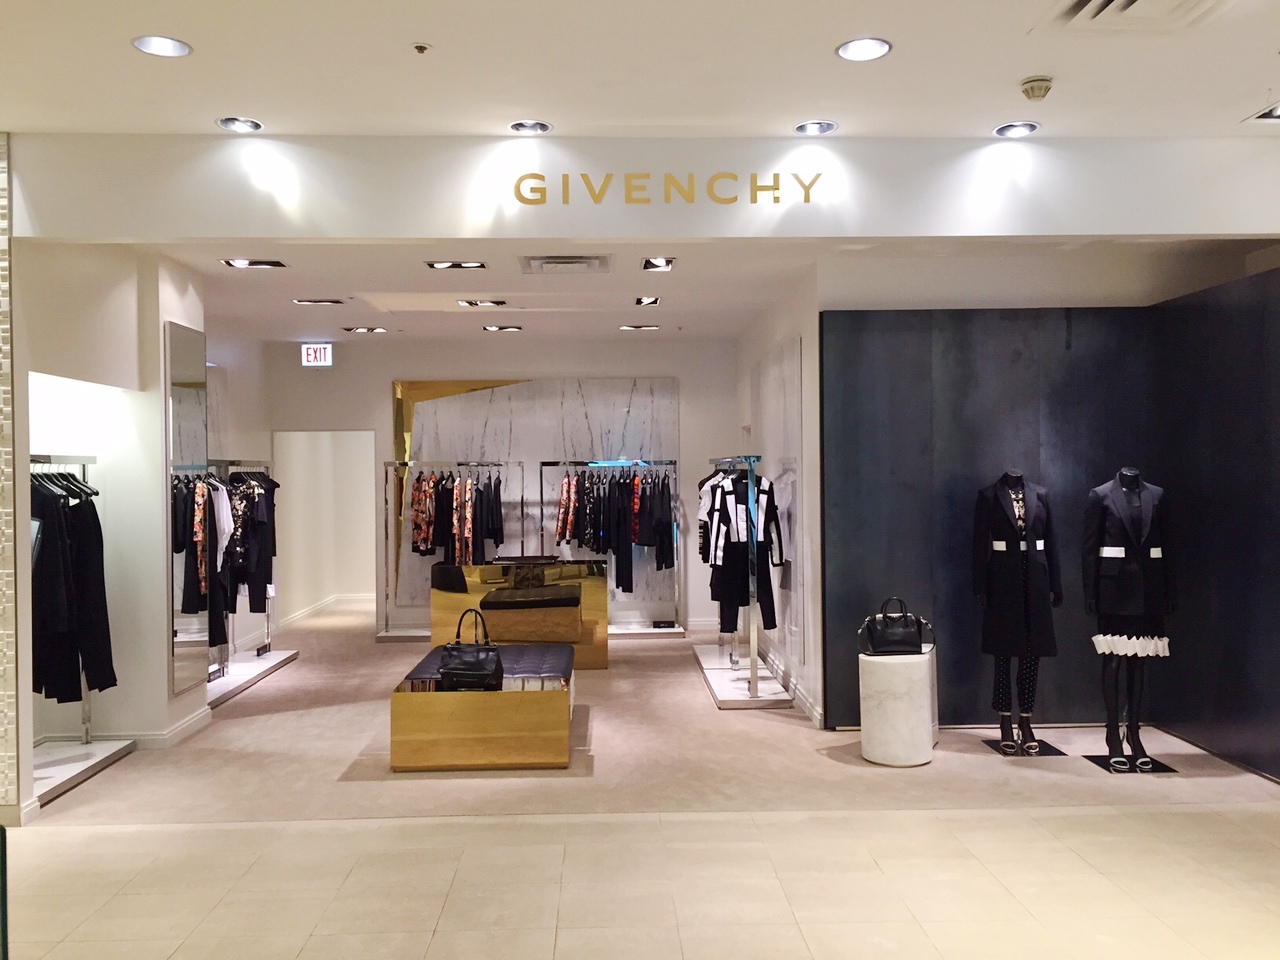 Saks's Renovated Givenchy Boutique is 